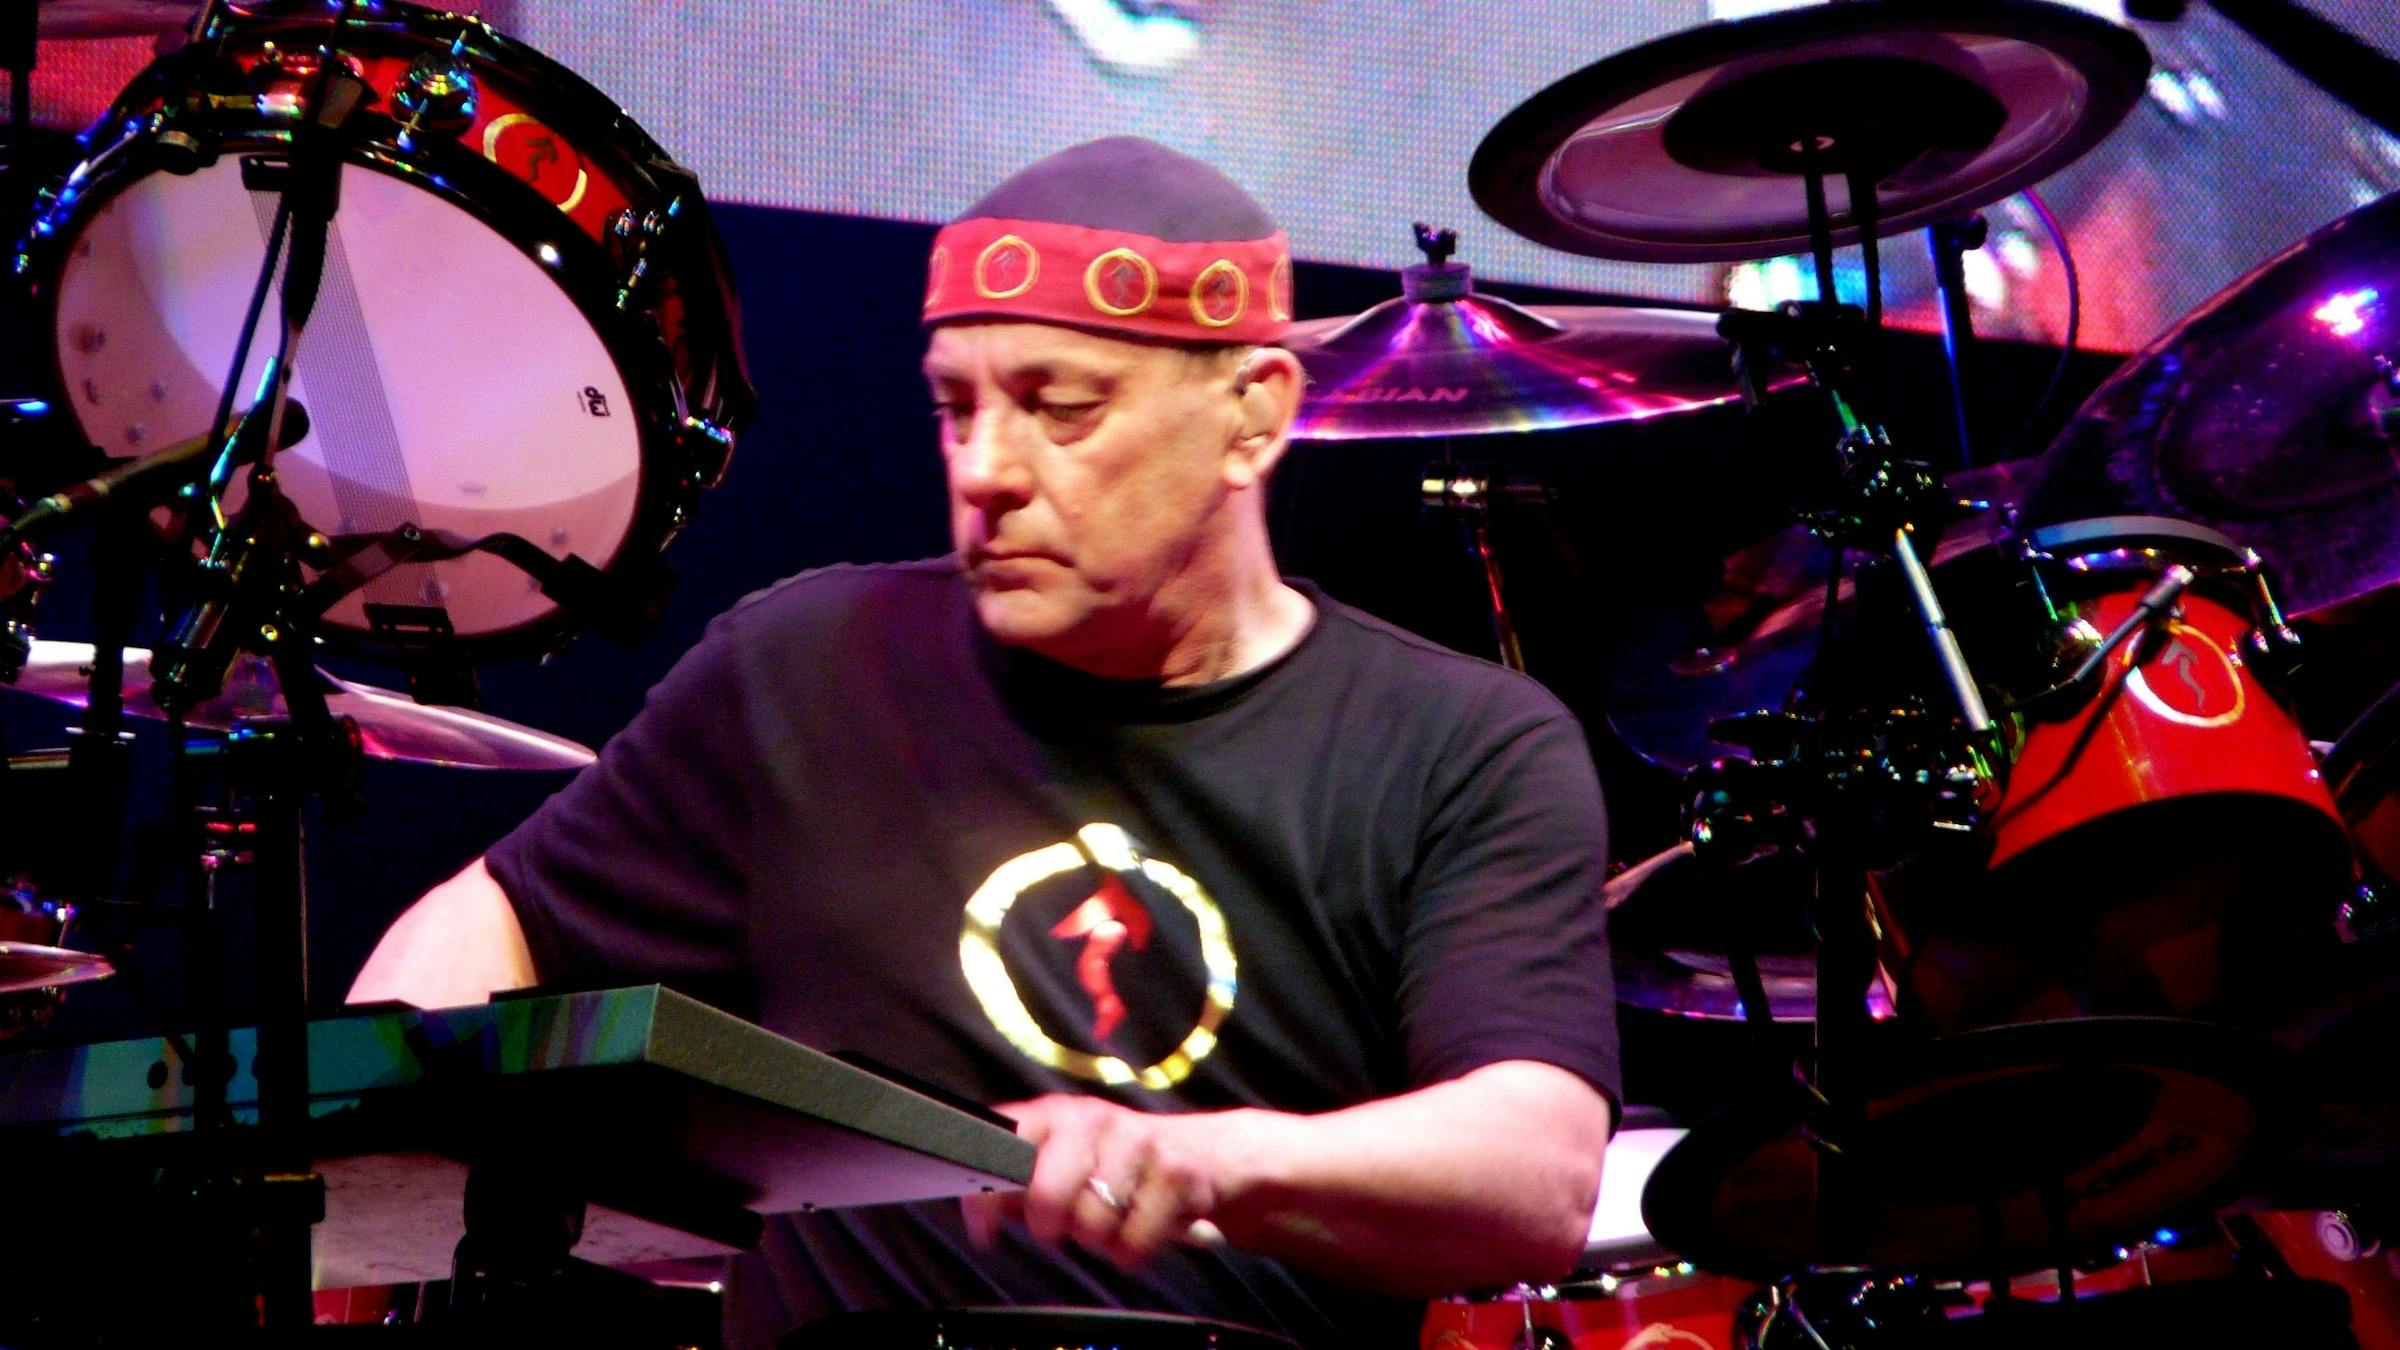 Neil Peart: The drummer who inspired a generation